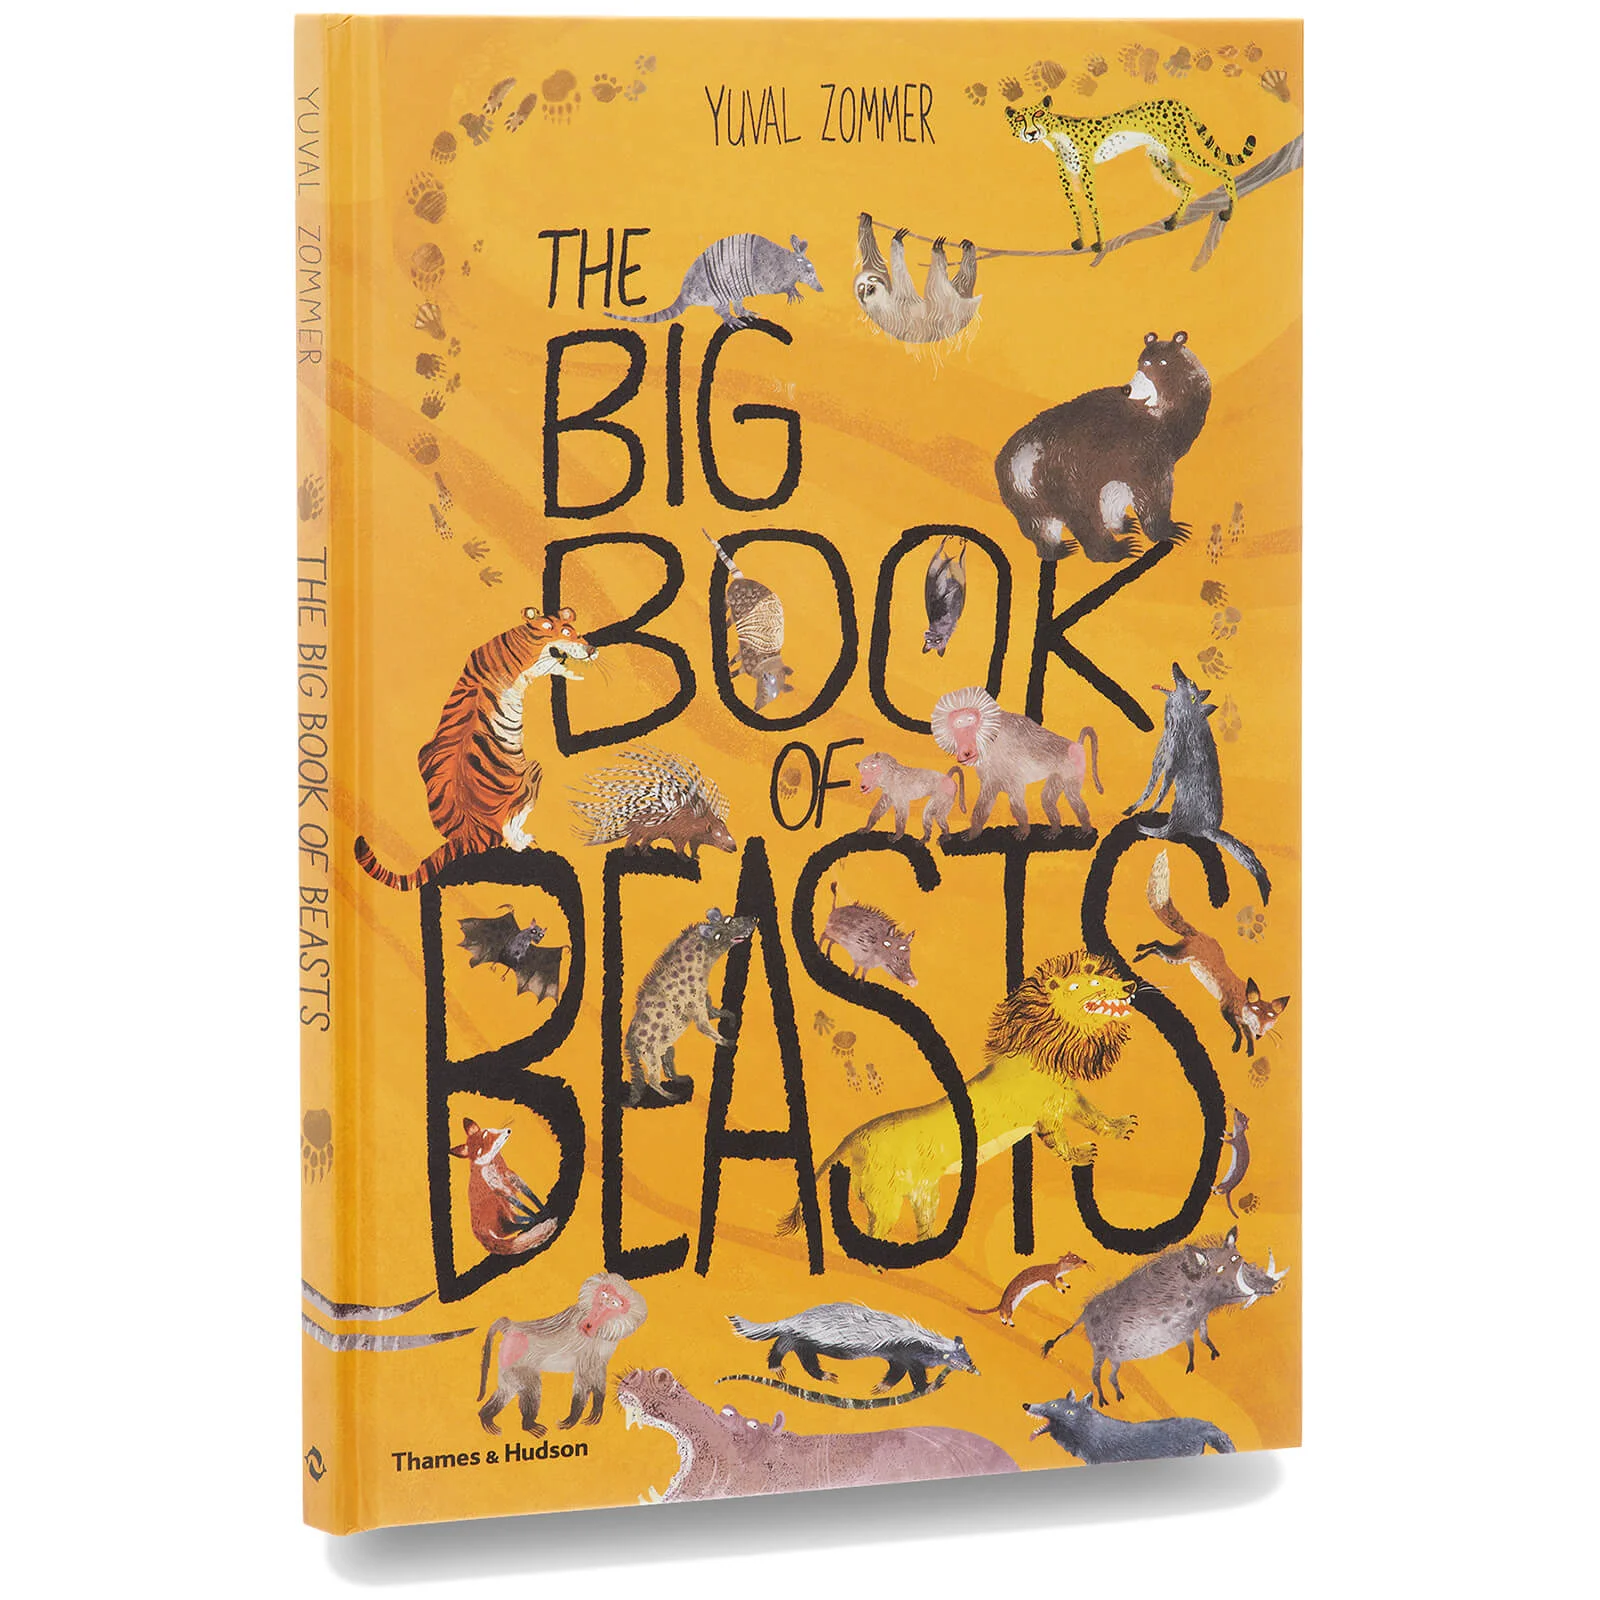 Thames and Hudson Ltd: The Big Book of Beasts Image 1